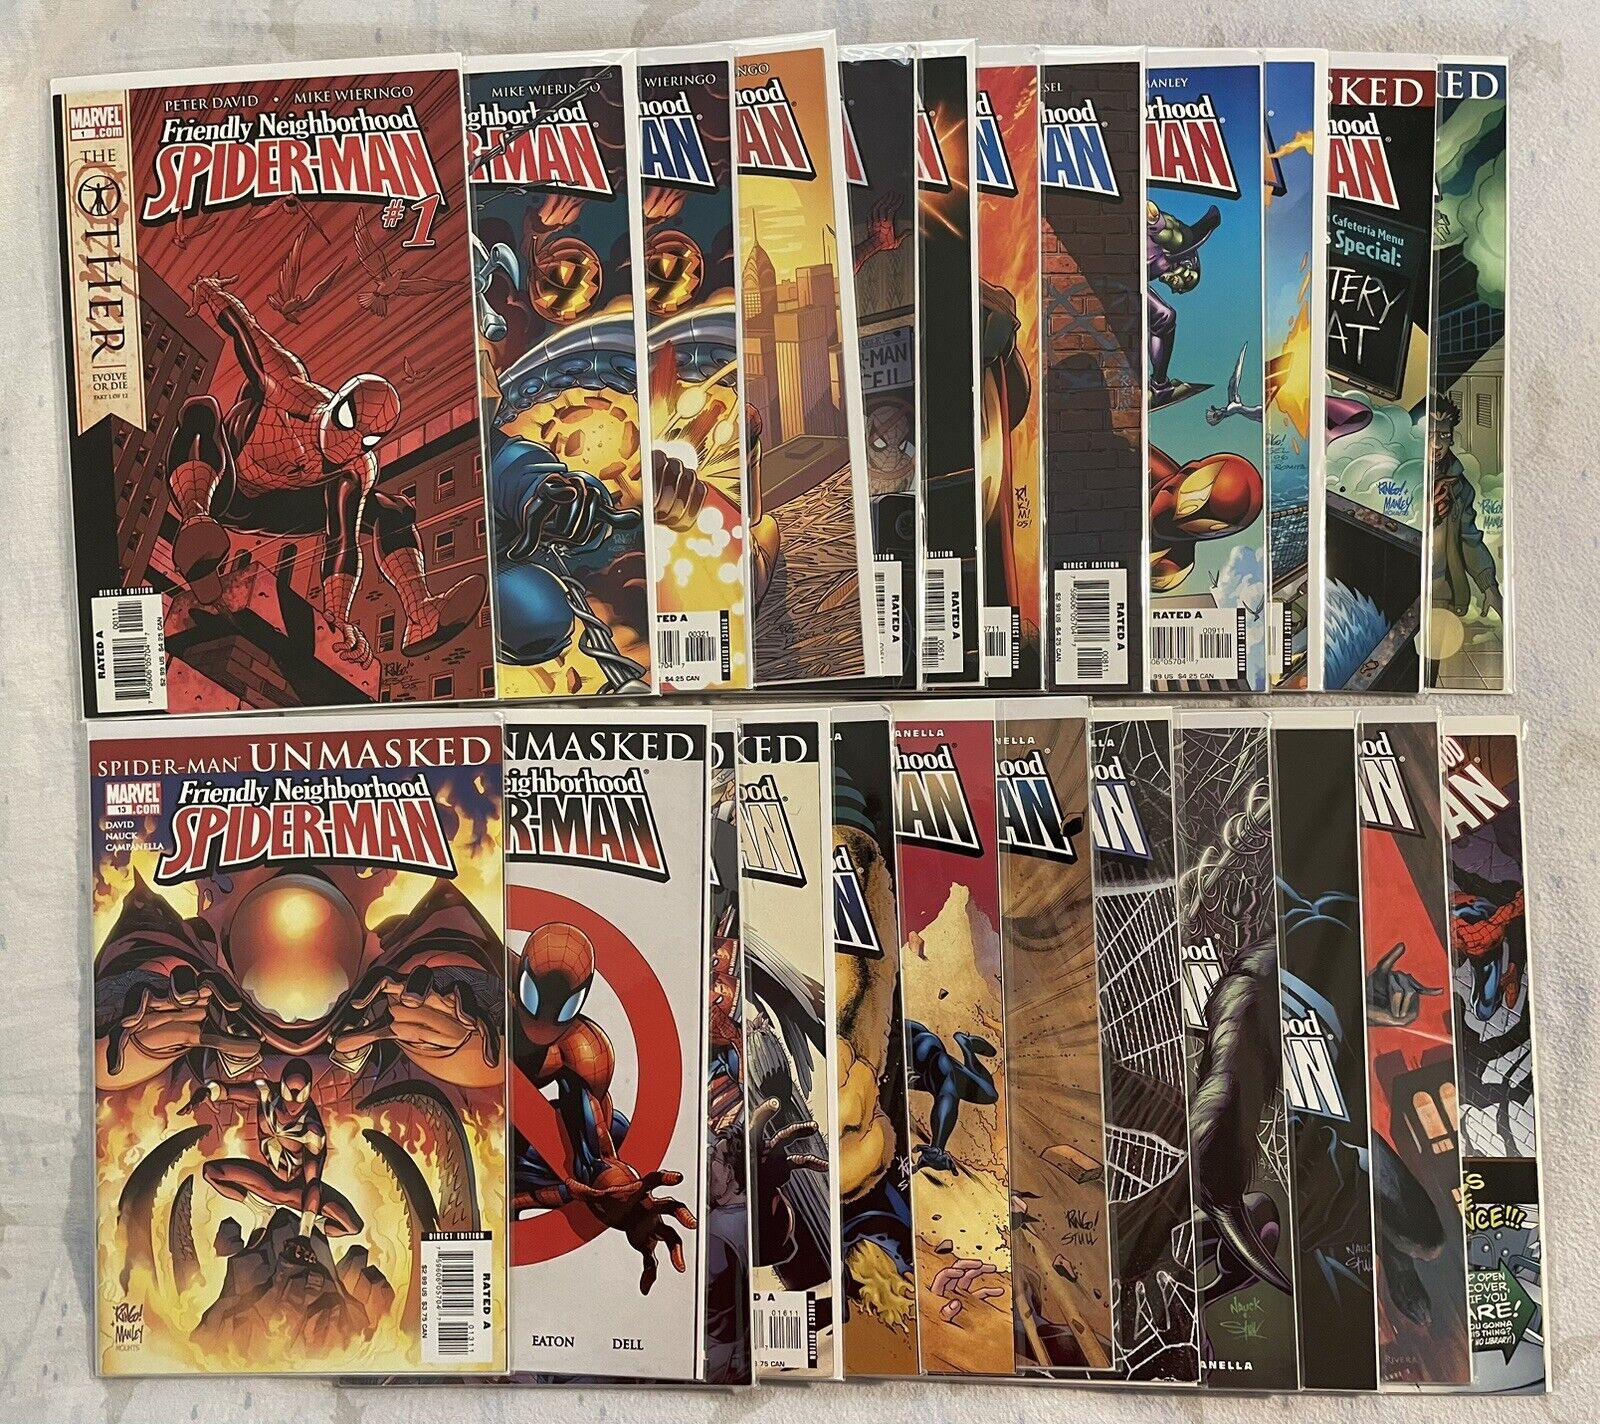 FRIENDLY NEIGHBORHOOD SPIDER-MAN 1-24 Complete Series (1 &2 are Variant)